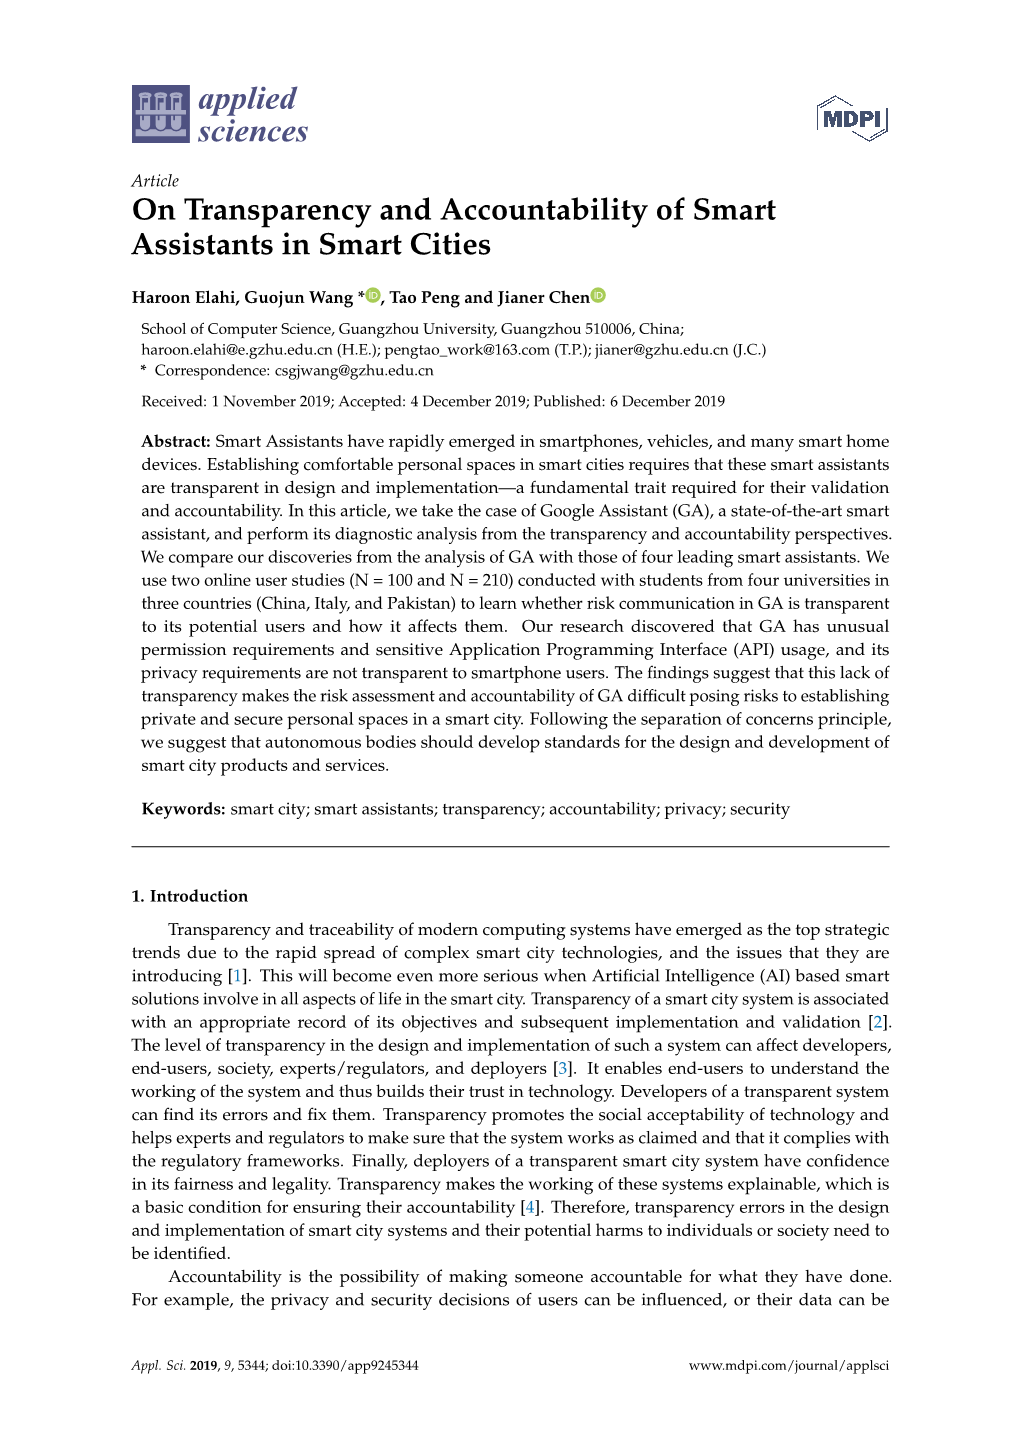 On Transparency and Accountability of Smart Assistants in Smart Cities